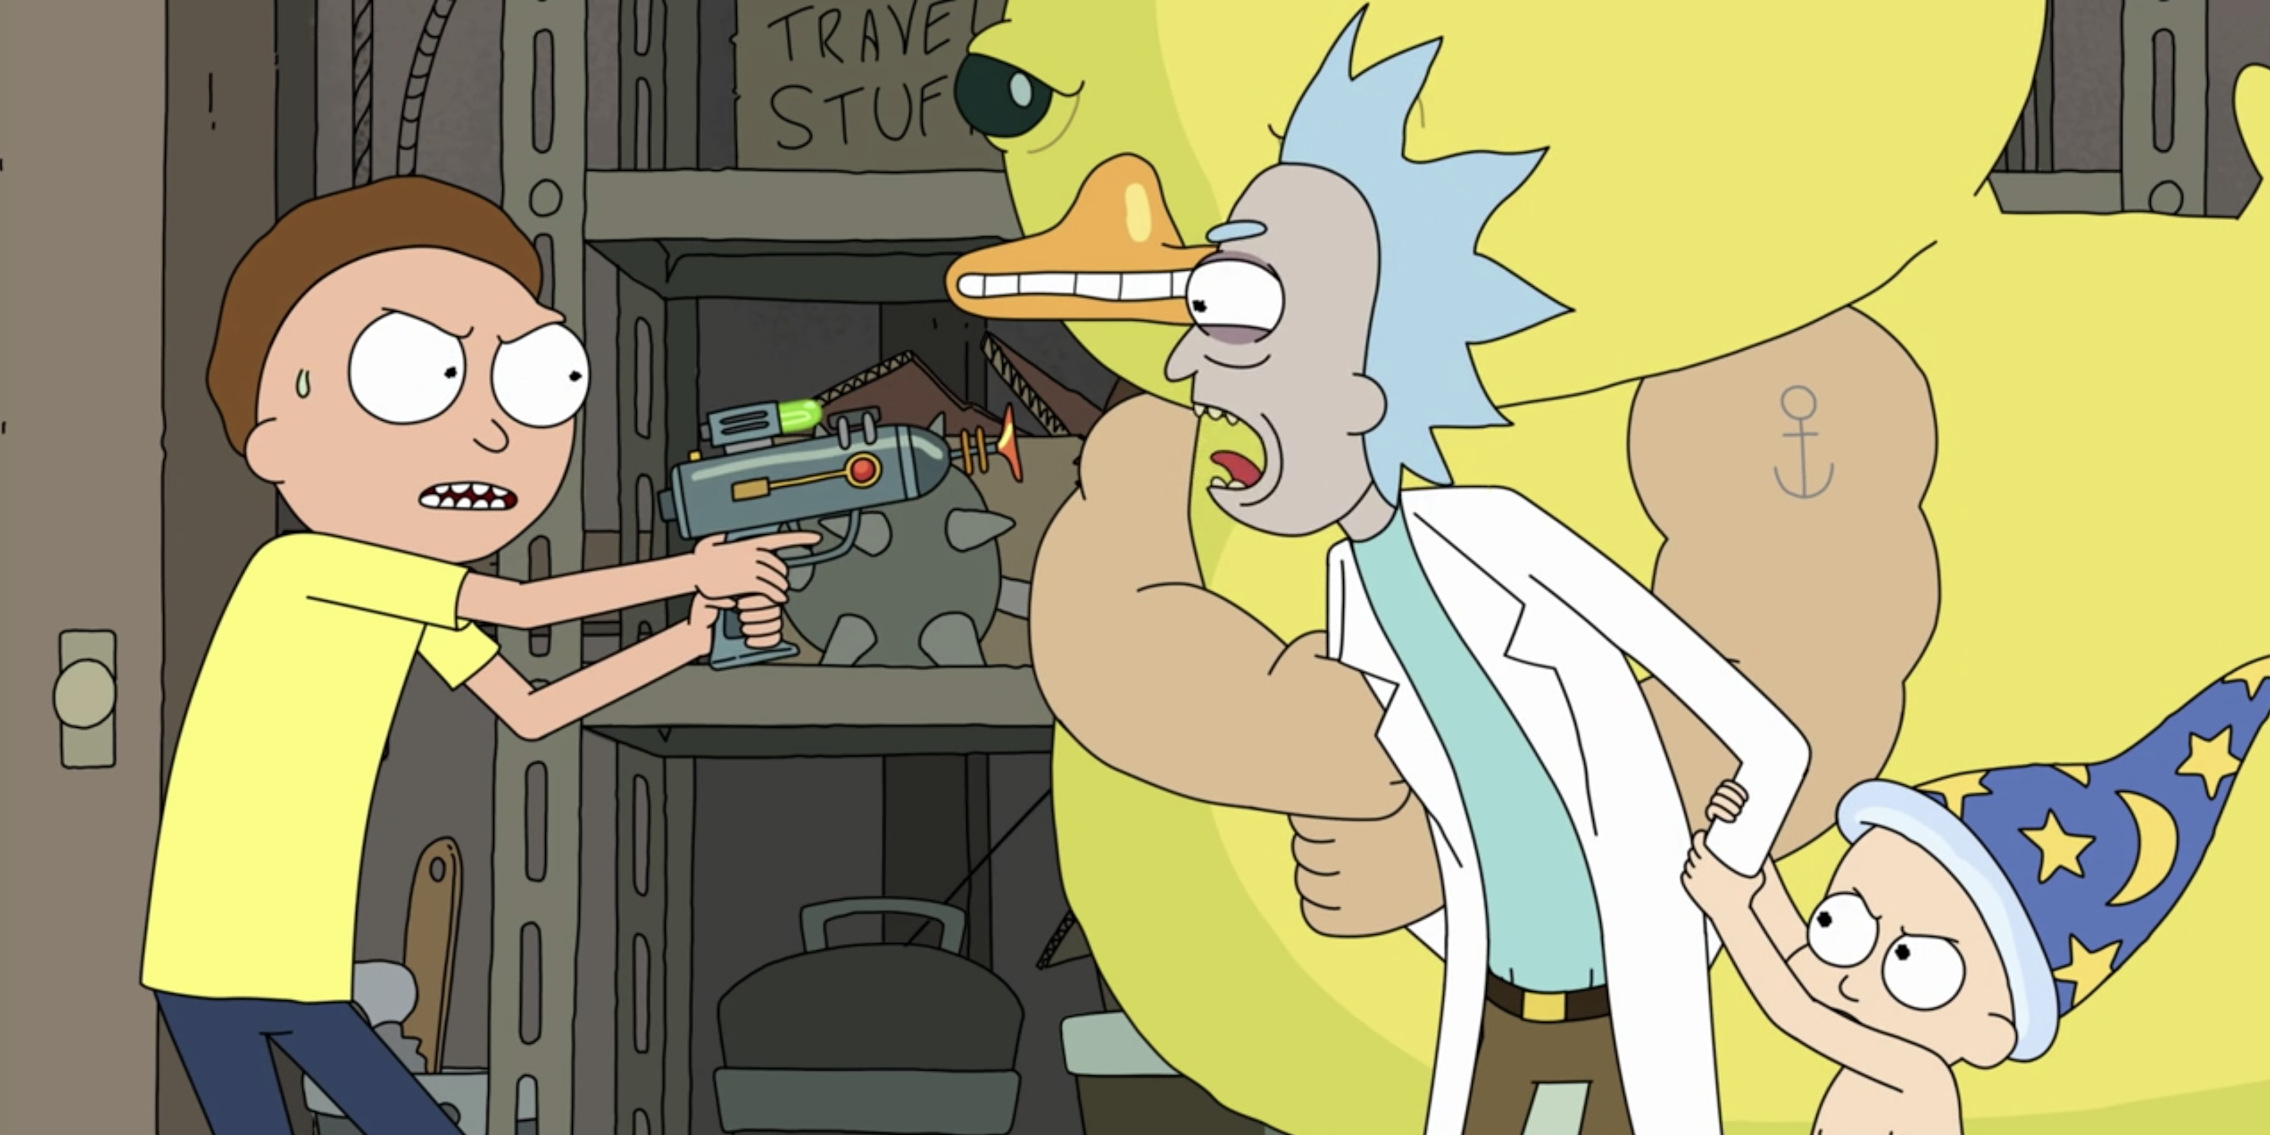 How to Watch Rick and Morty Online: Your 3 Best Options